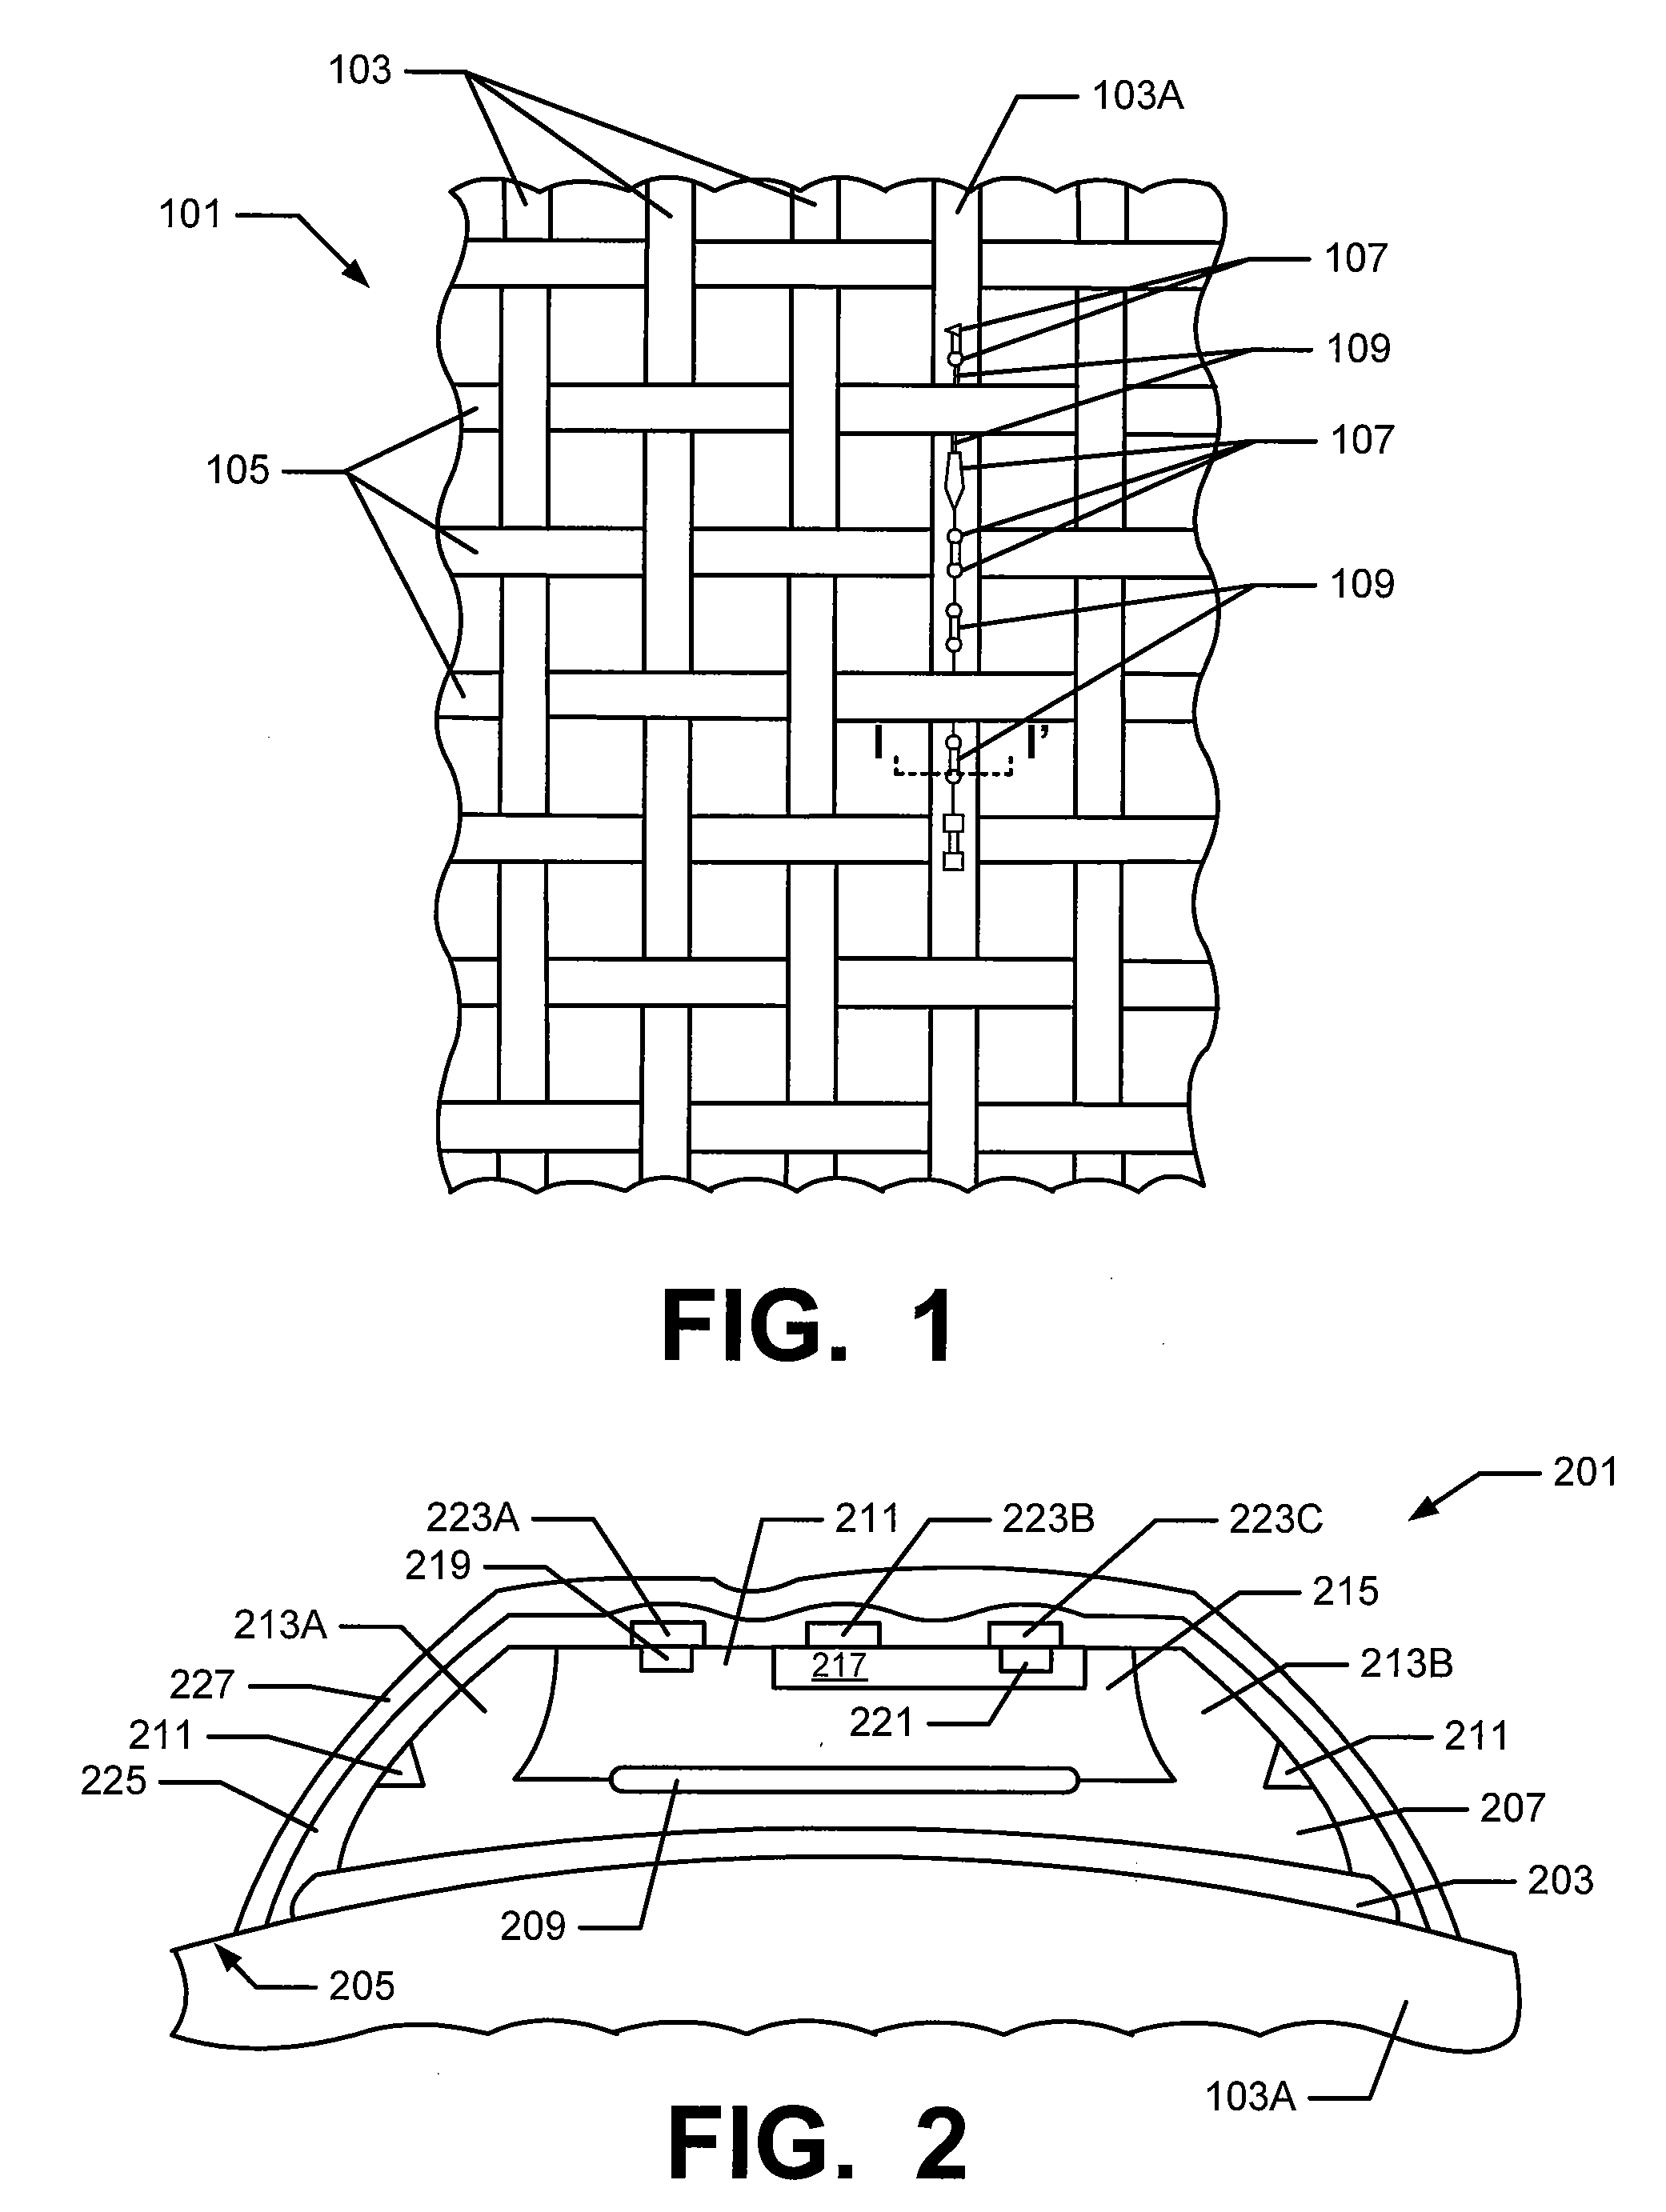 Deposition of Electronic Circuits on Fibers and Other Materials